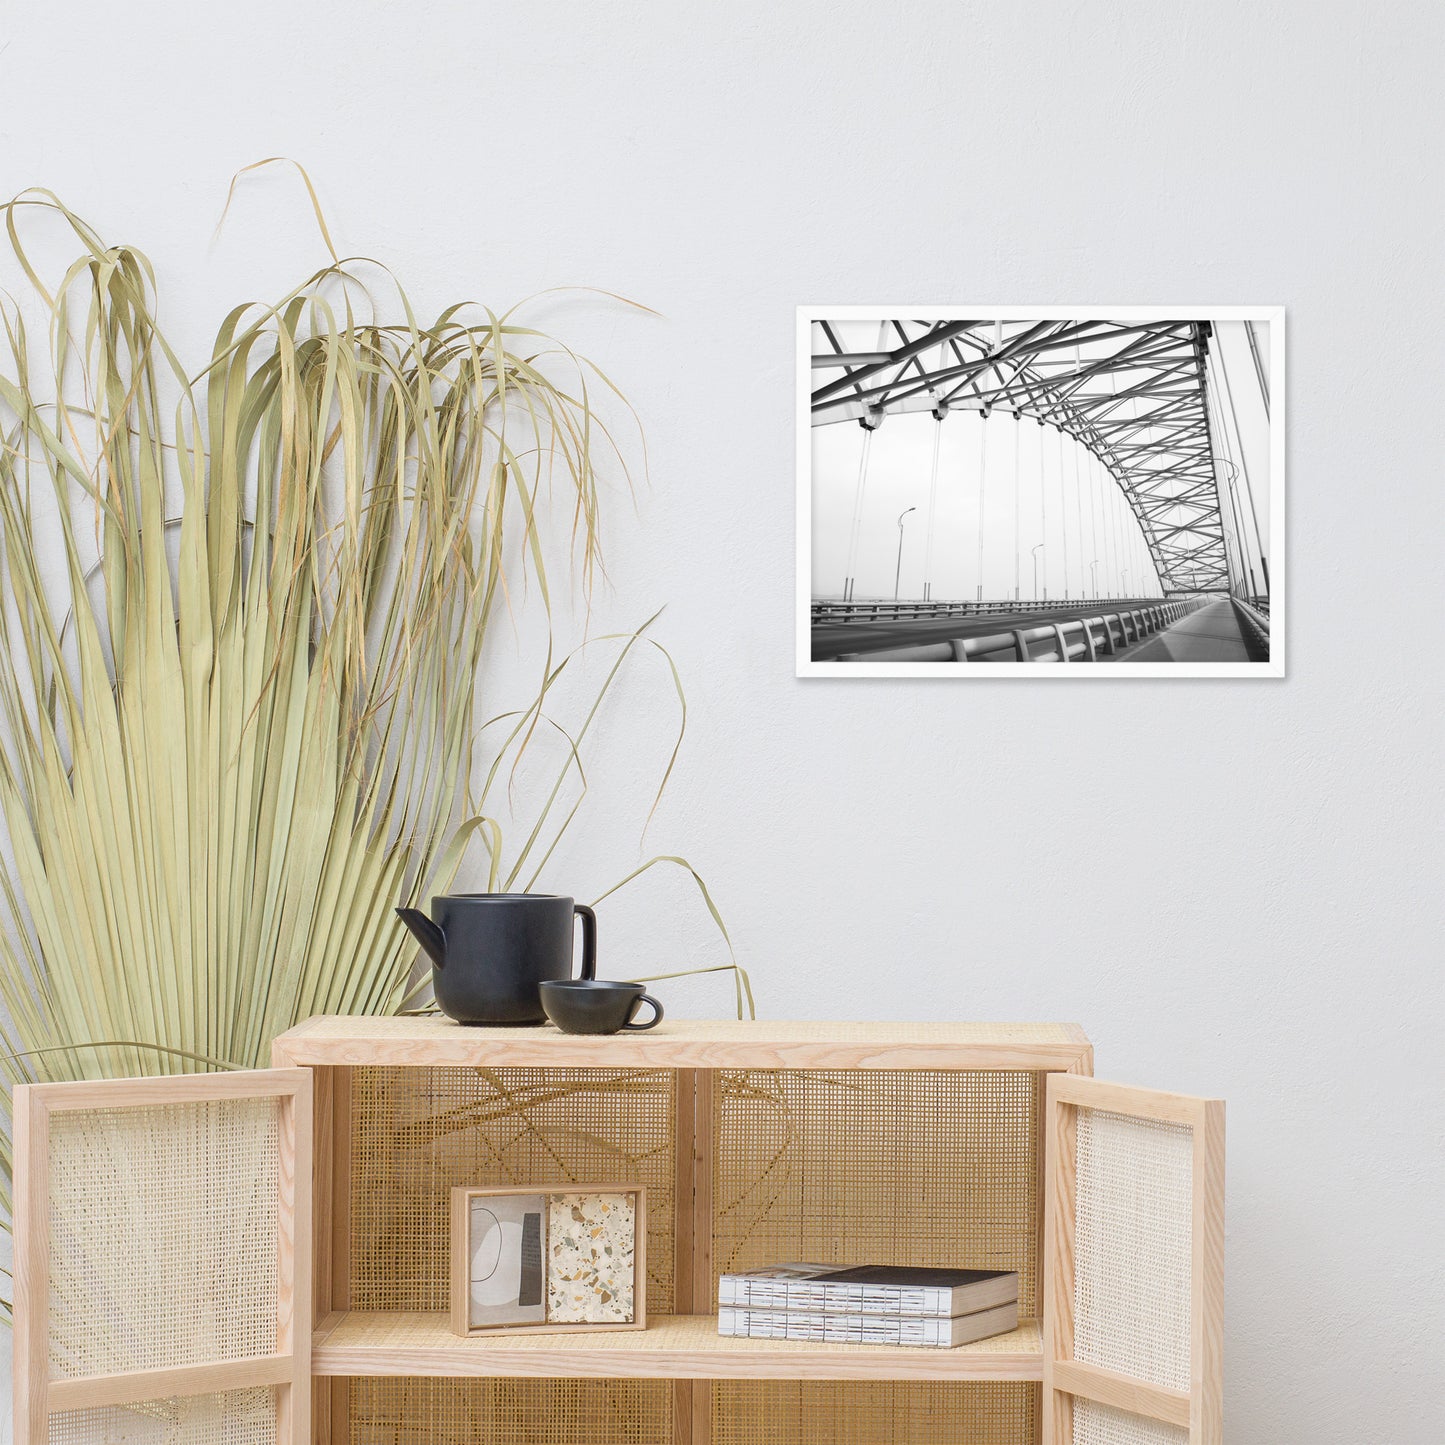 Ethereal Crossing Architectural Photograph Framed Wall Art Print